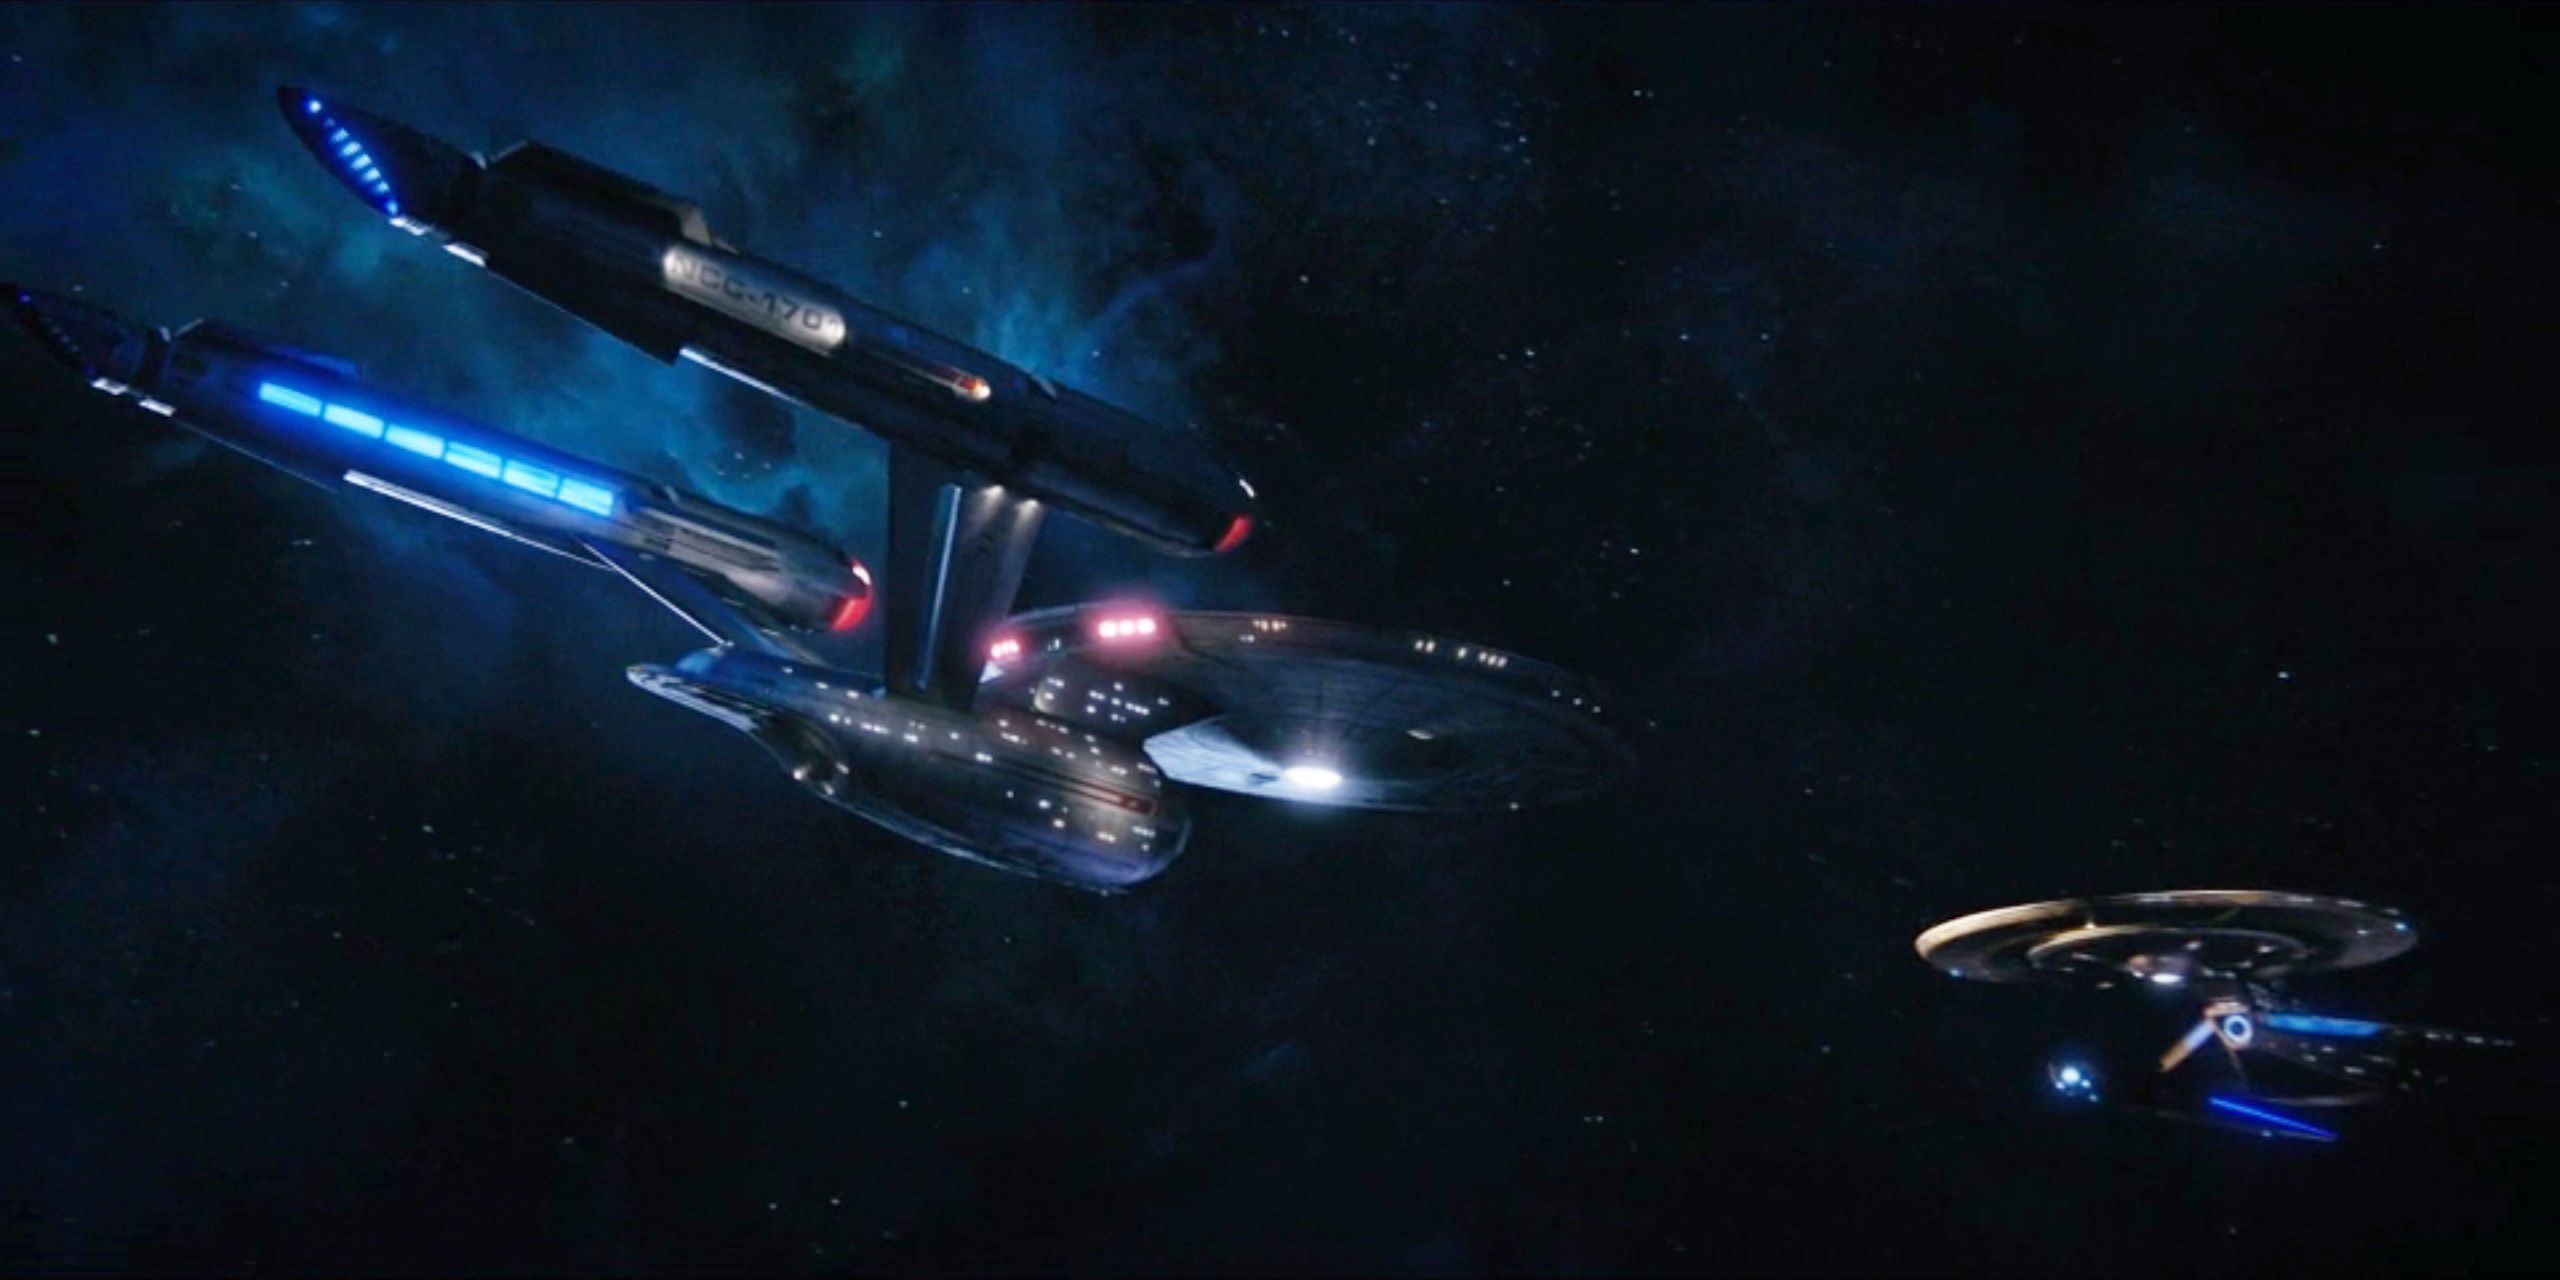 ENTERPRISE ON DISCOVERY